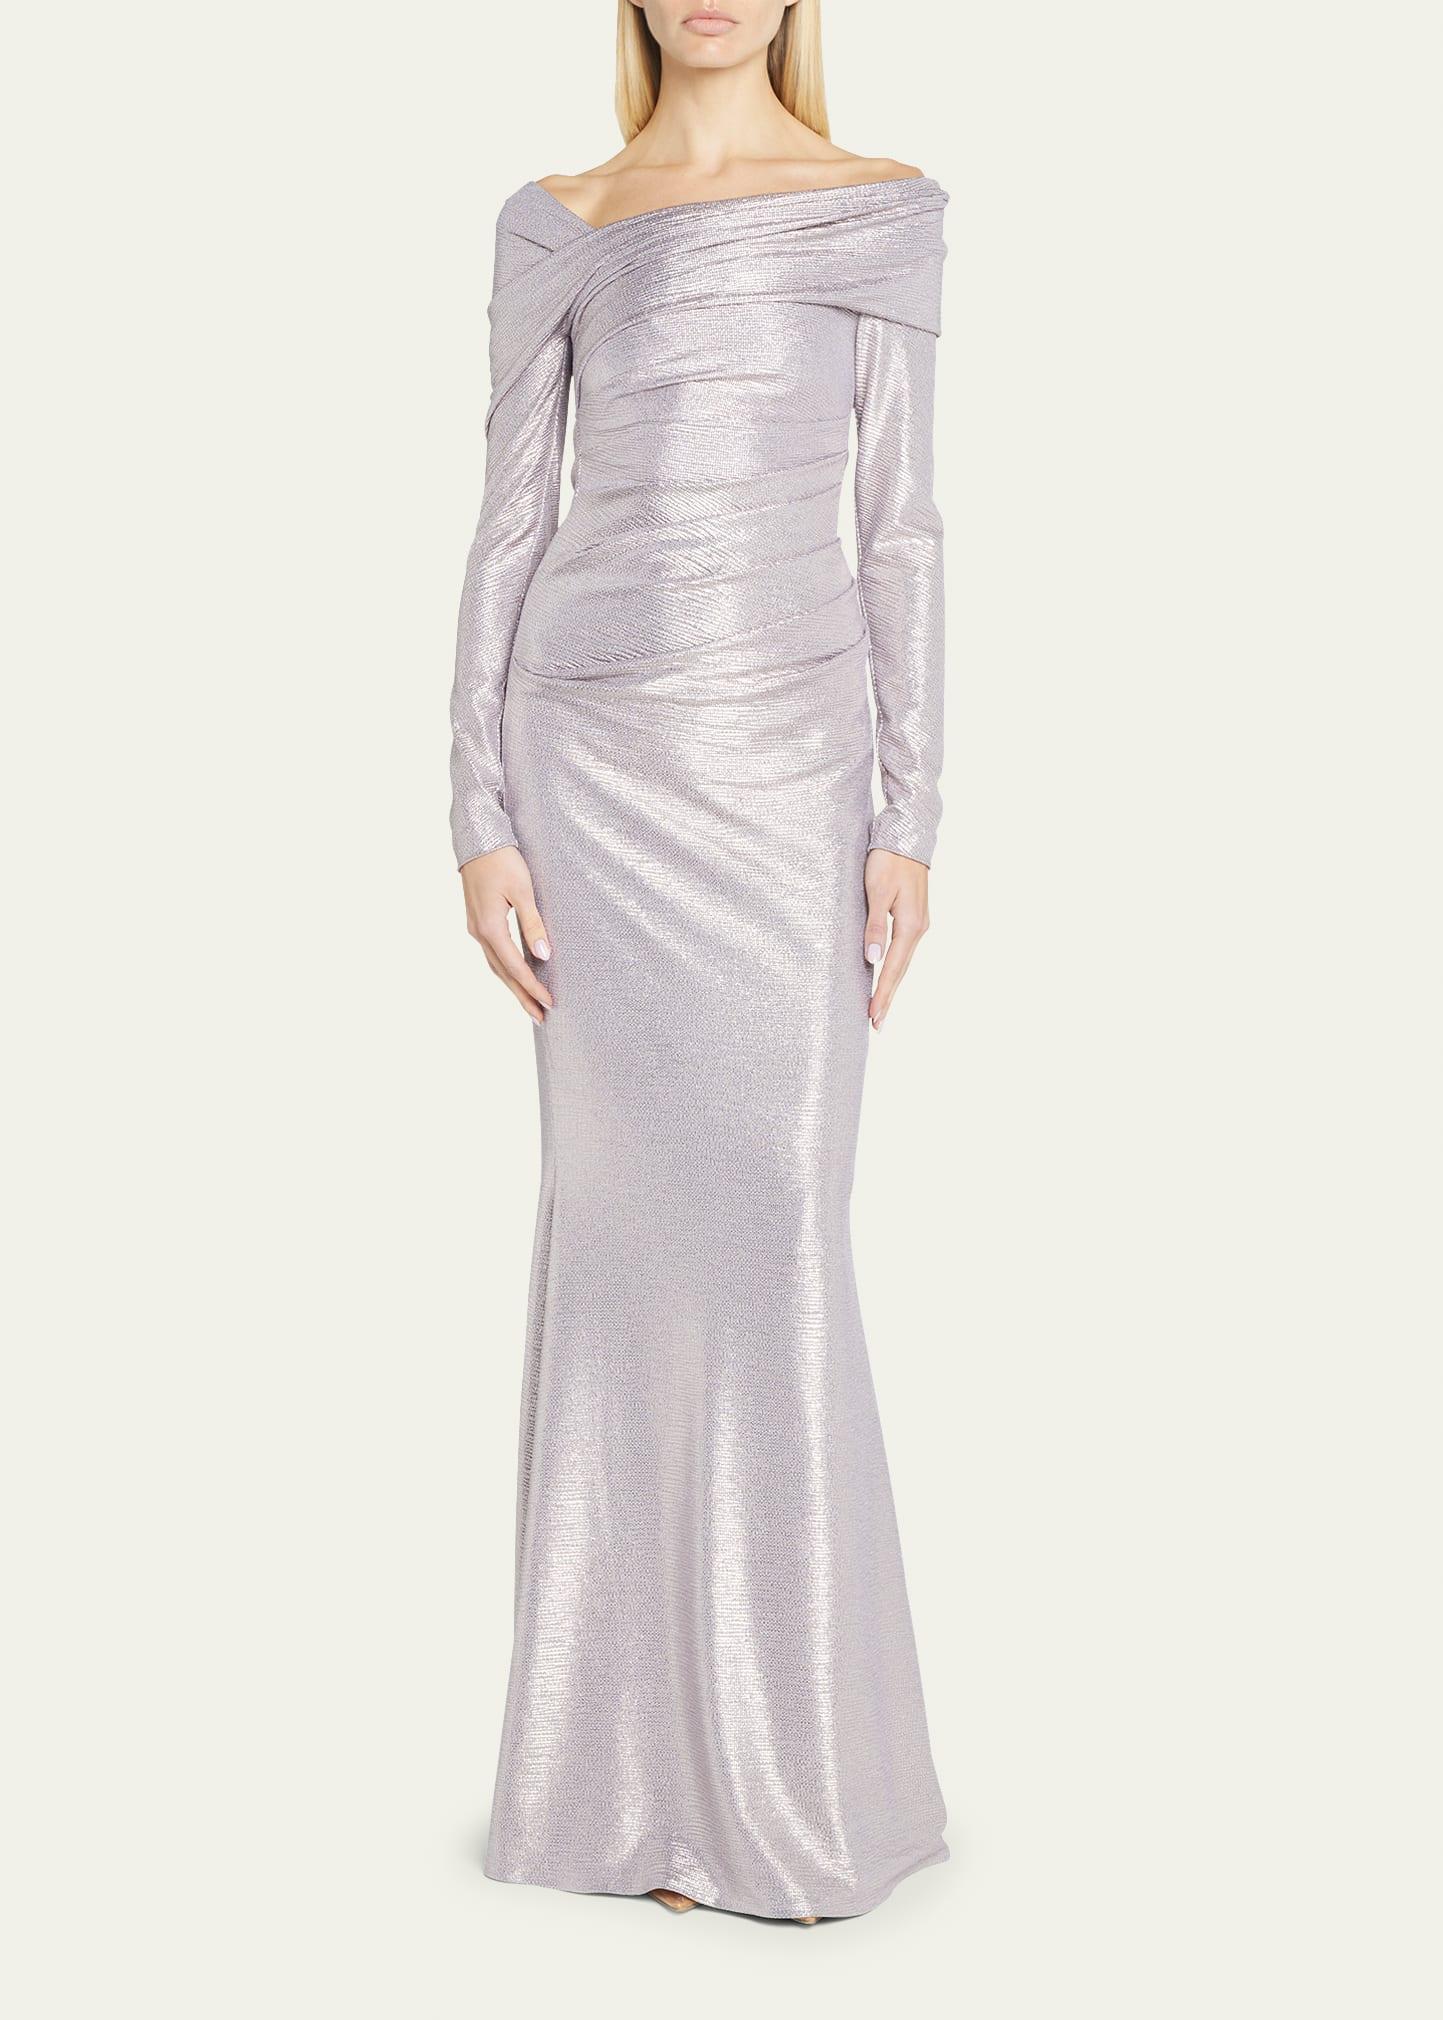 Talbot Runhof Mirrorball Stretch Off-the-shoulder Draped Gown in Purple ...